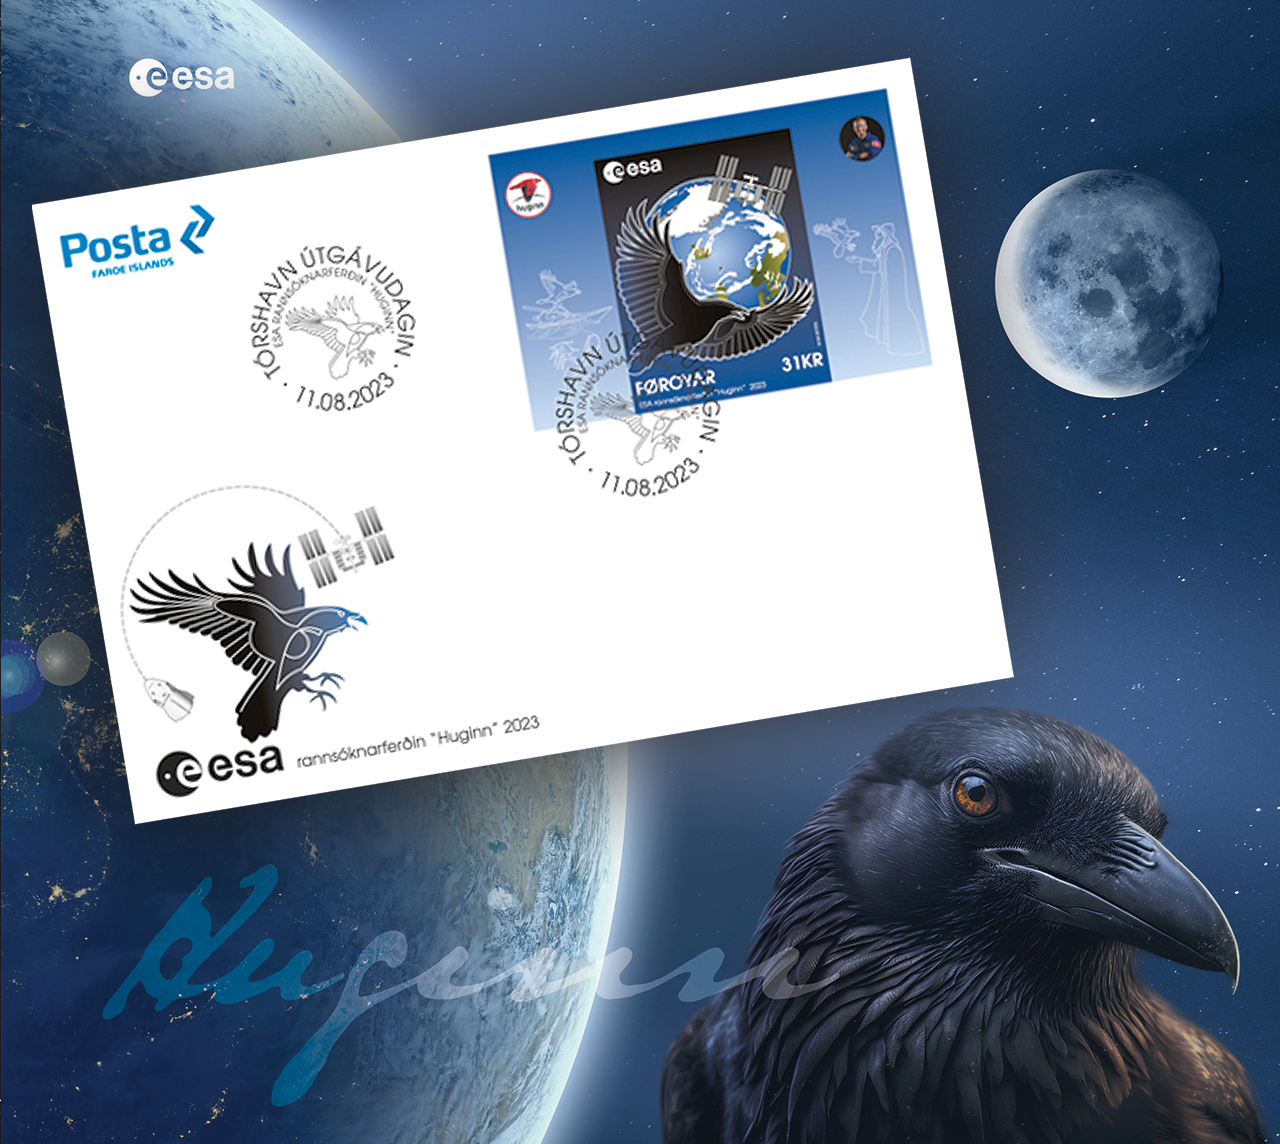 image showing a postcard with a stamp on it, superimposed over an image of the earth and moon with a raven in the foreground.